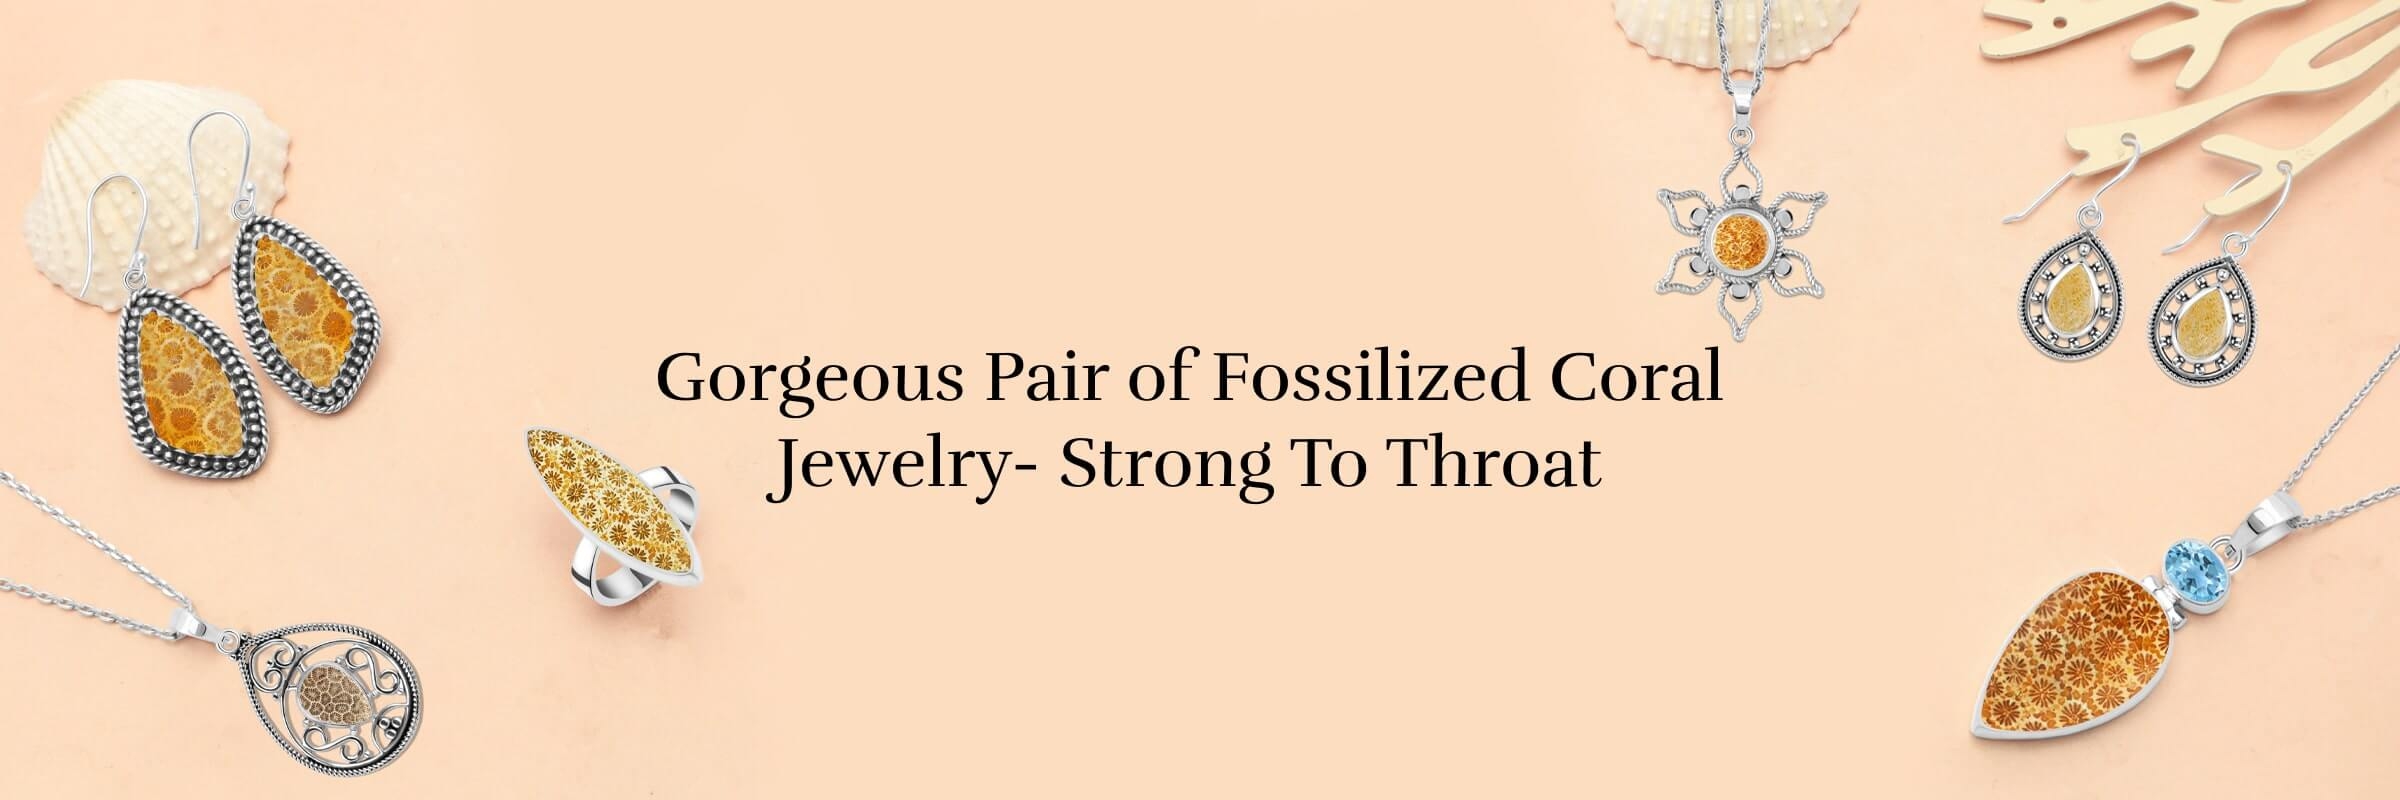 Healing Properties Fossilized Coral Jewelry